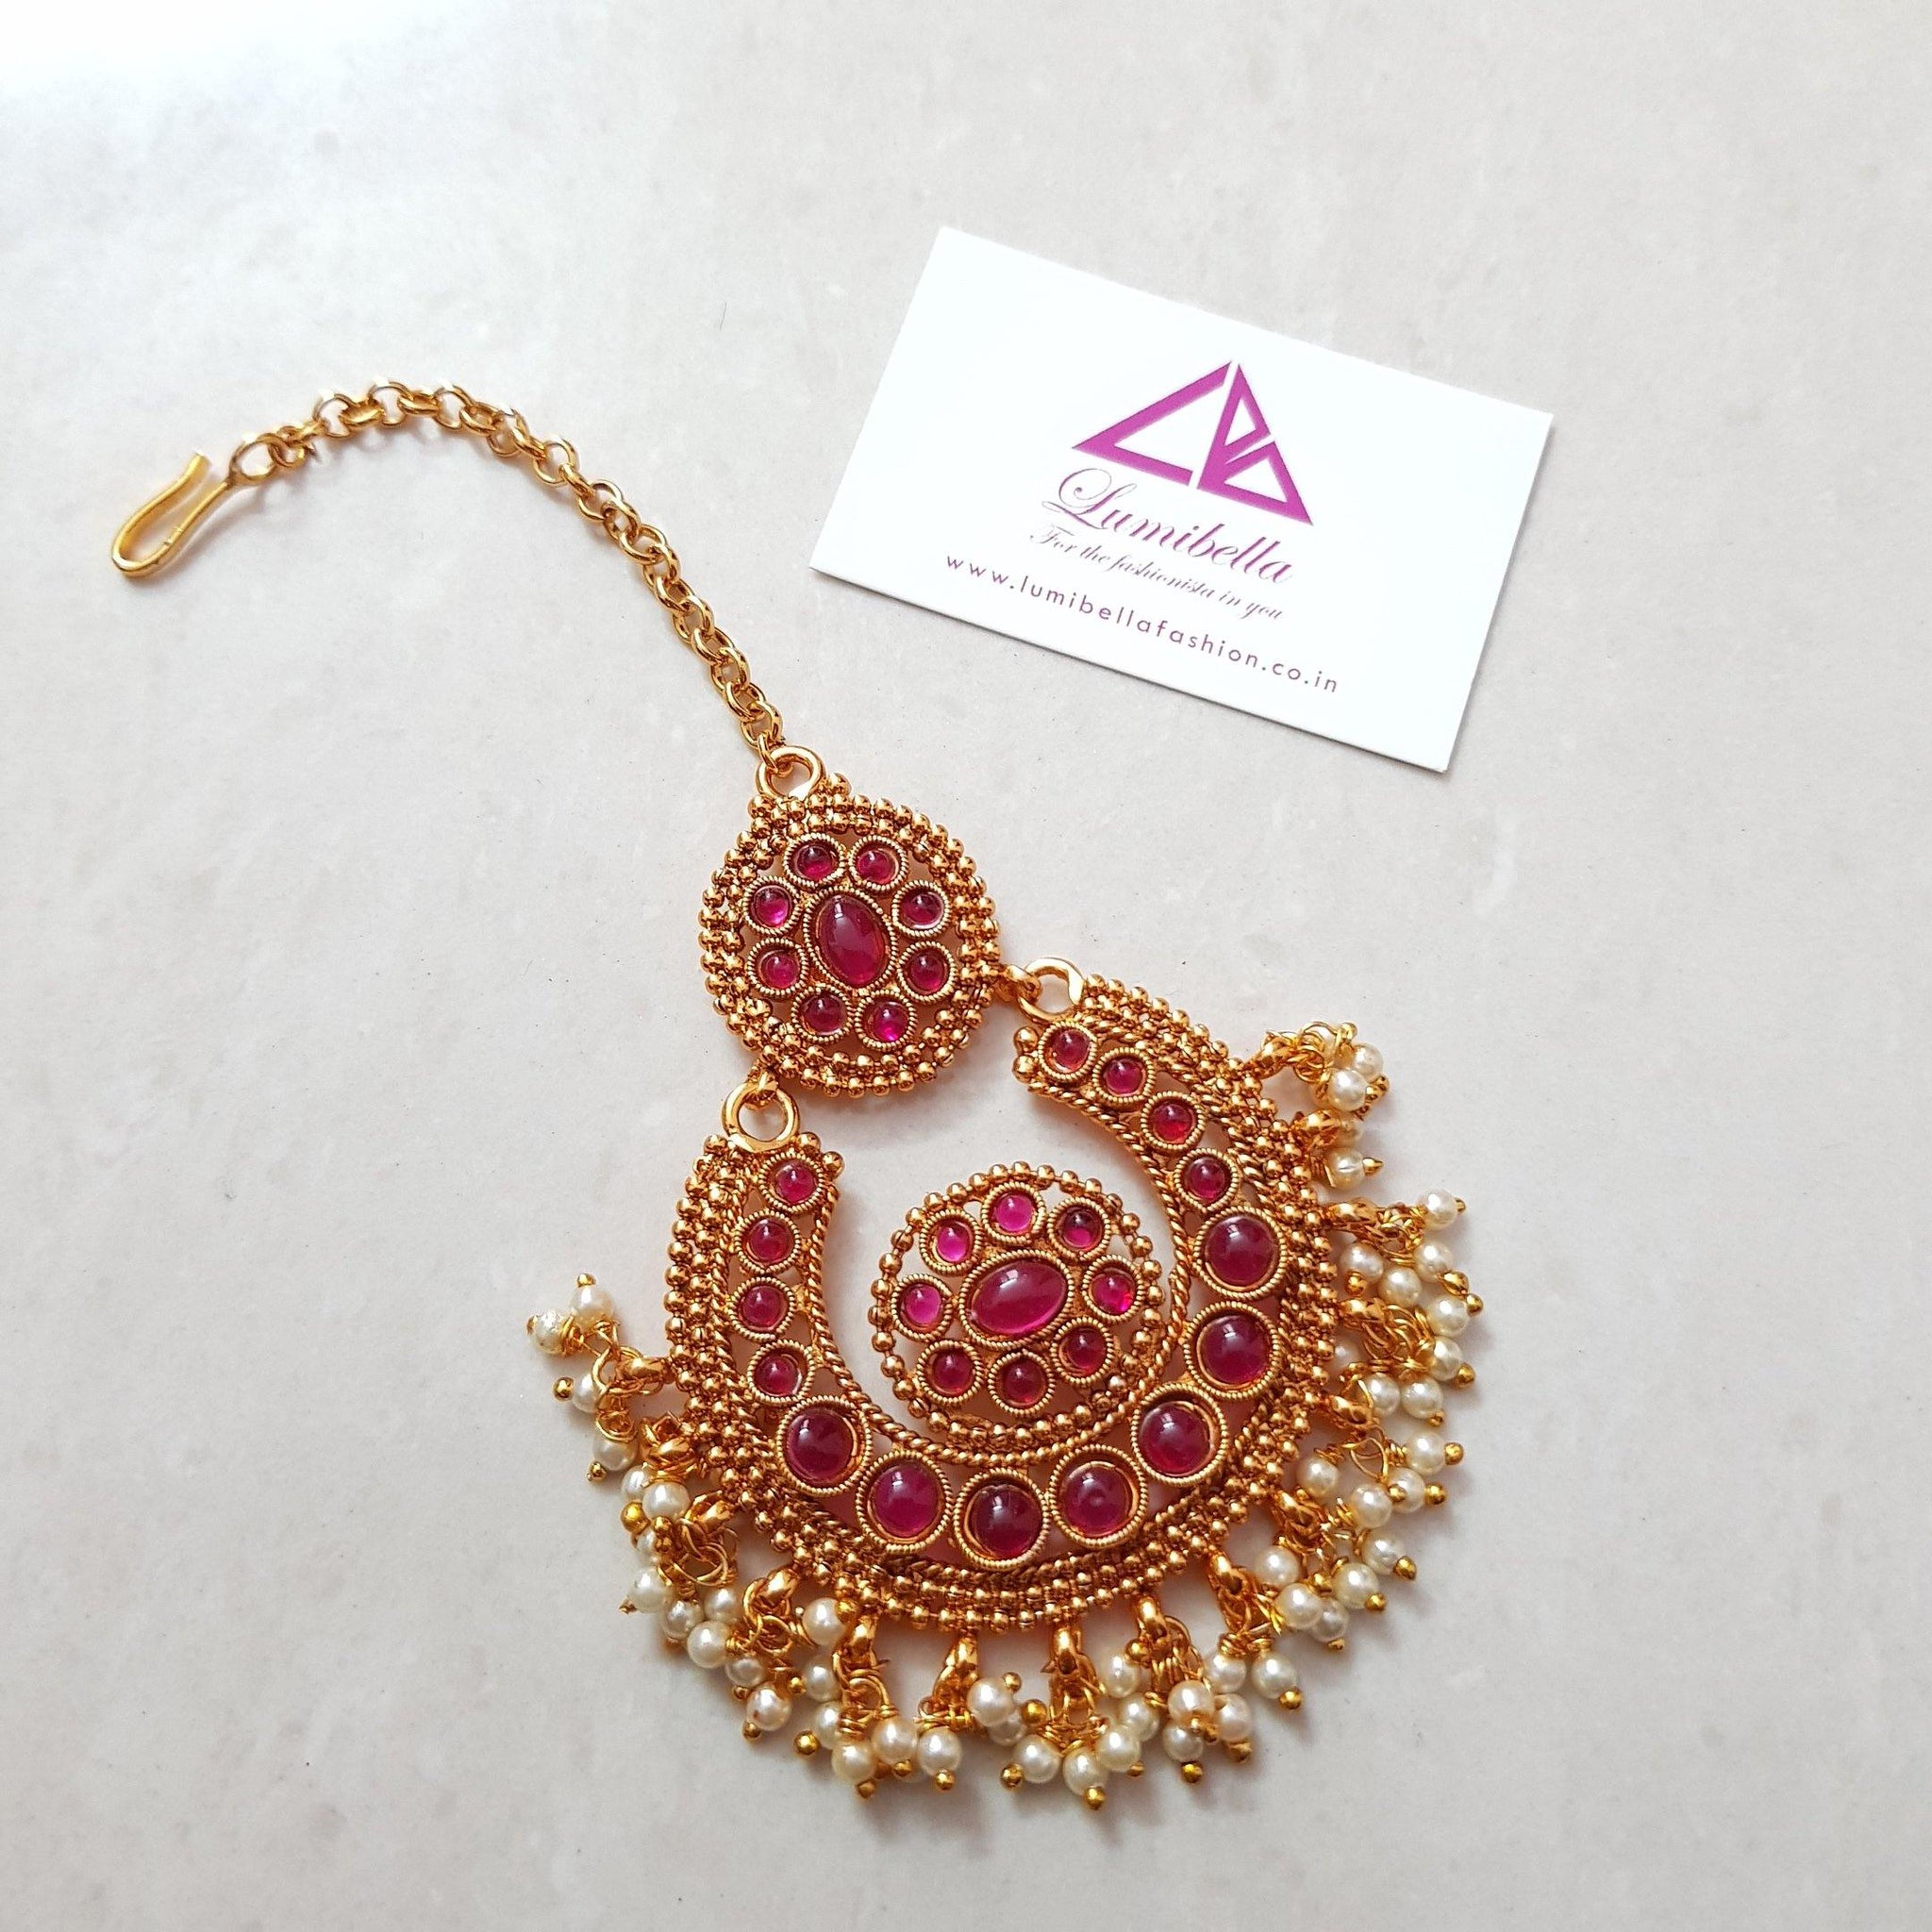 Antique Gold Polish Floral Patterned Maang Tikka with Ruby Faux Stones - LumibellaFashion